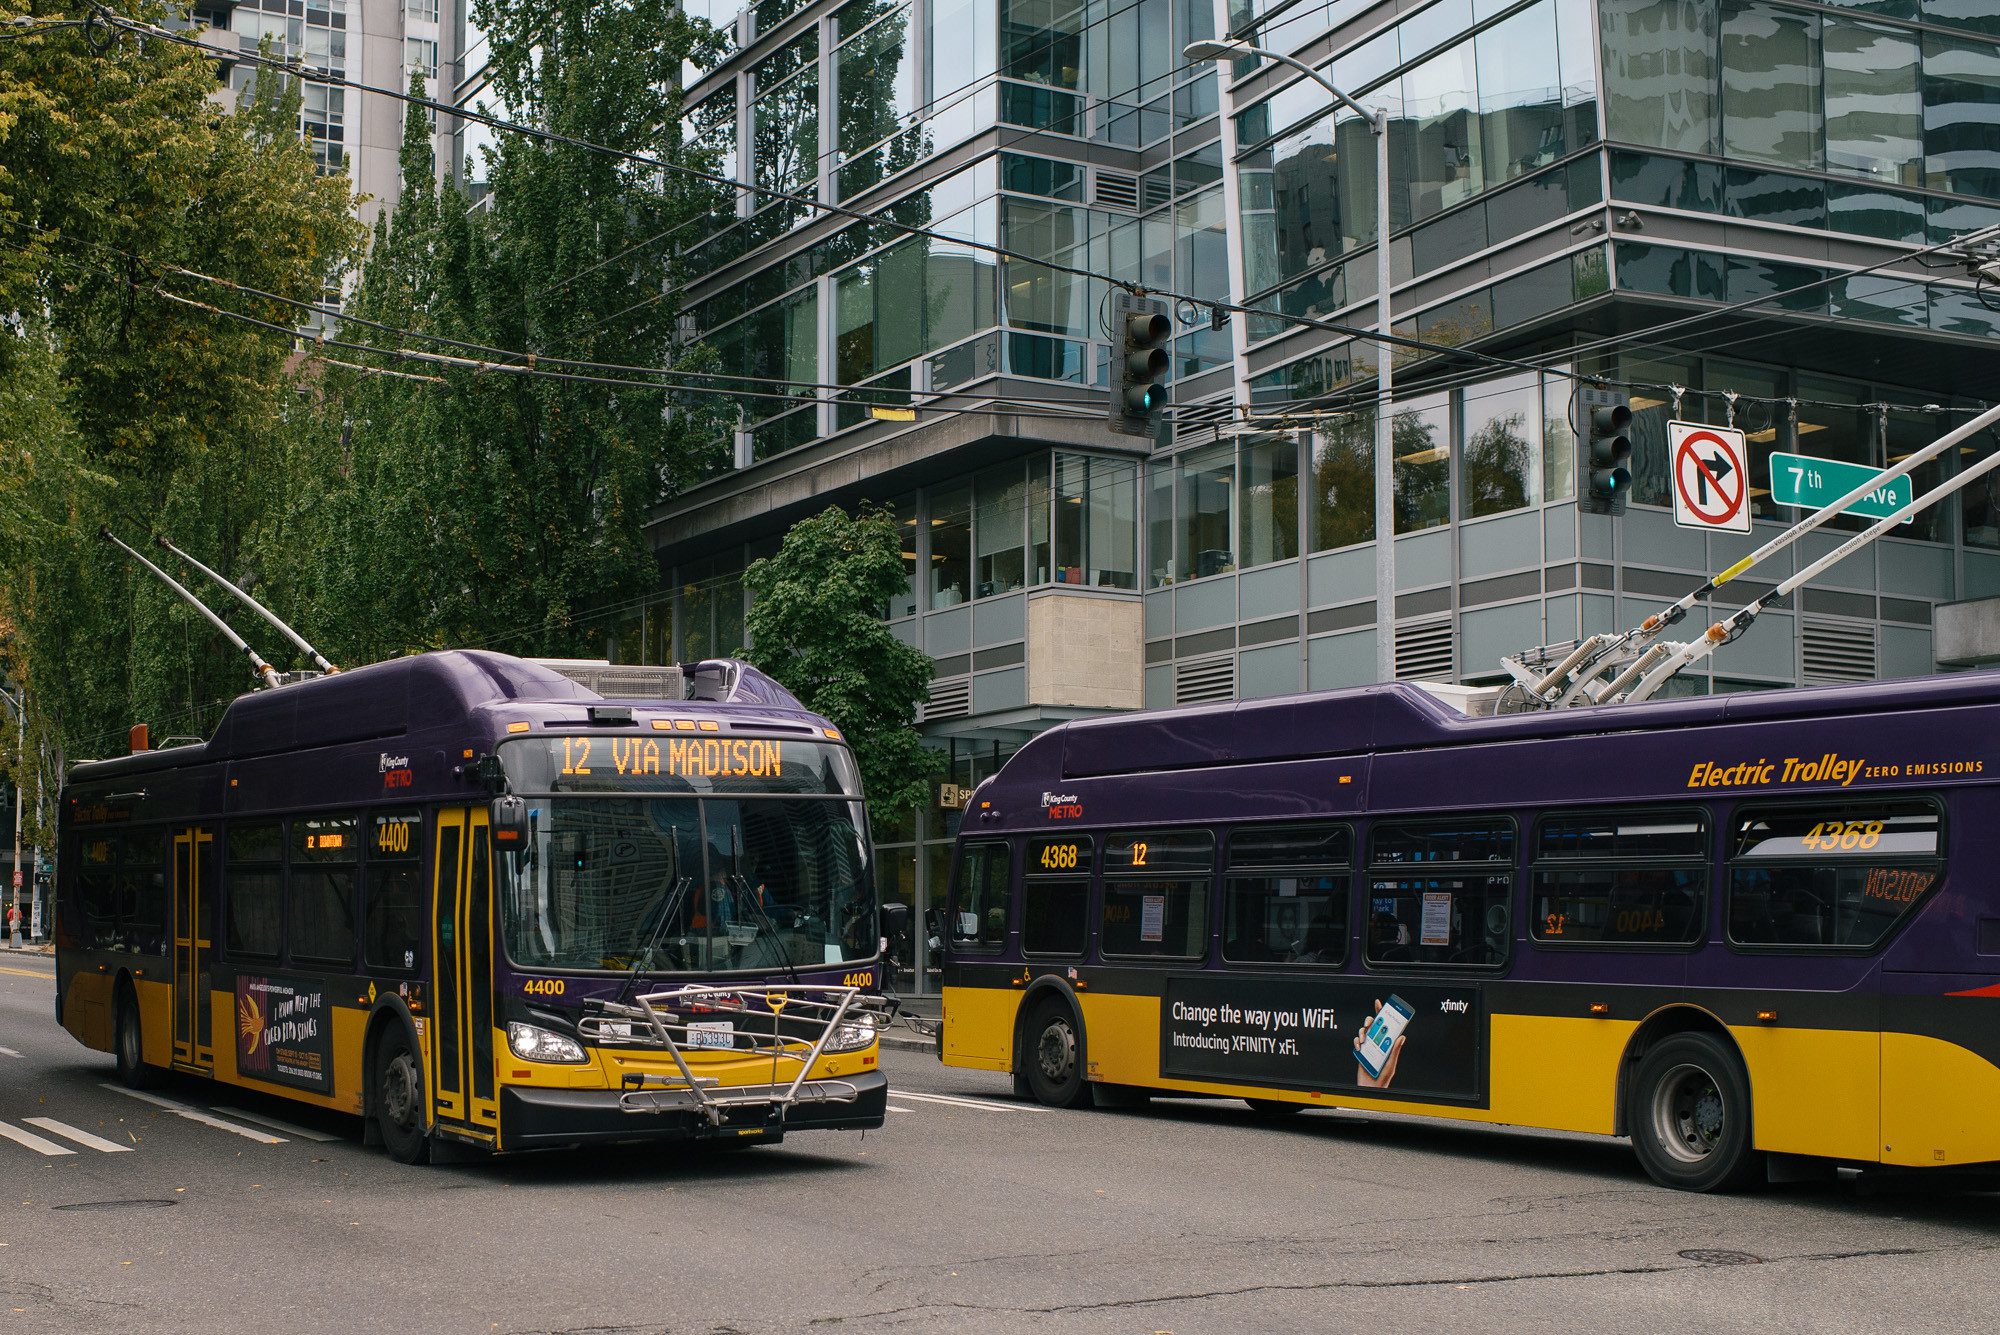 Two purple and yellow buses pass by each other, with large buildings and trees in the background on a cloudy day.